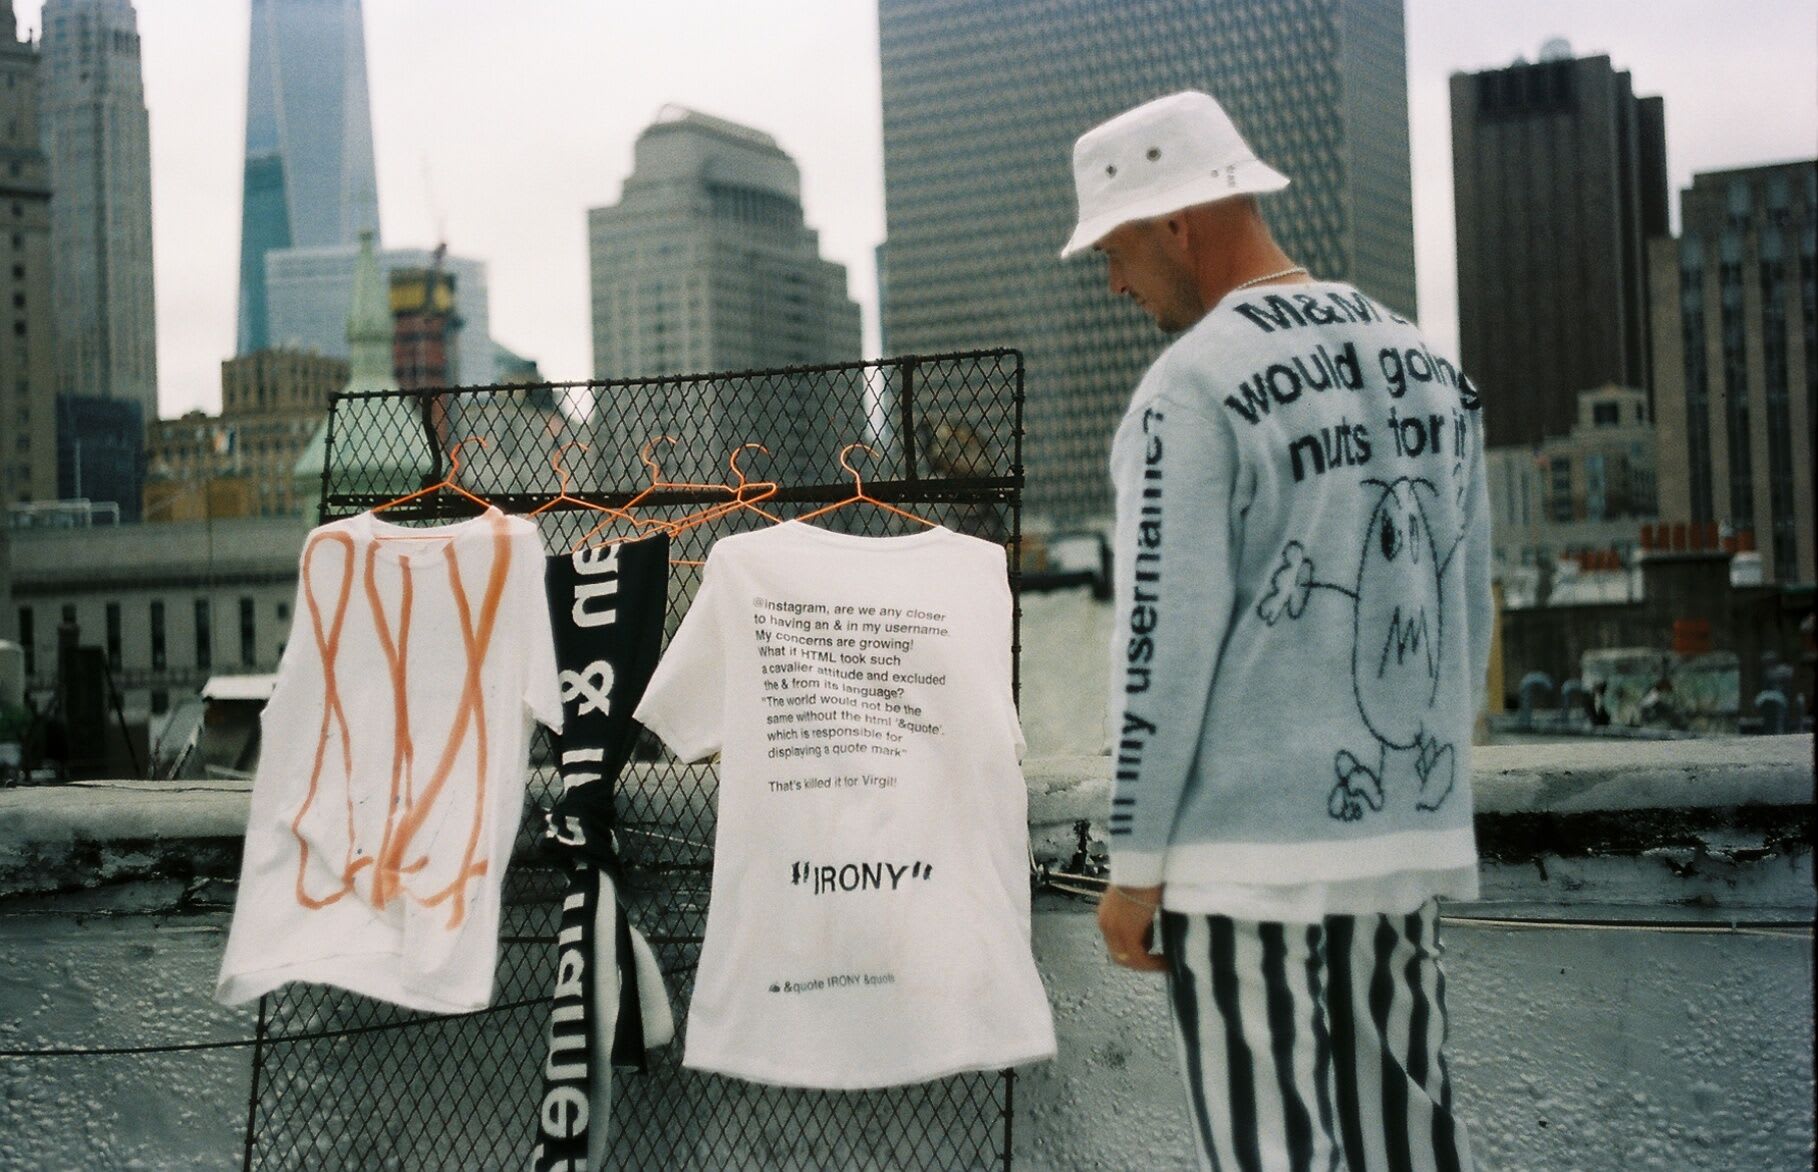 How a Graphic Designer Landed an Off-White Collaboration With Virgil Abloh